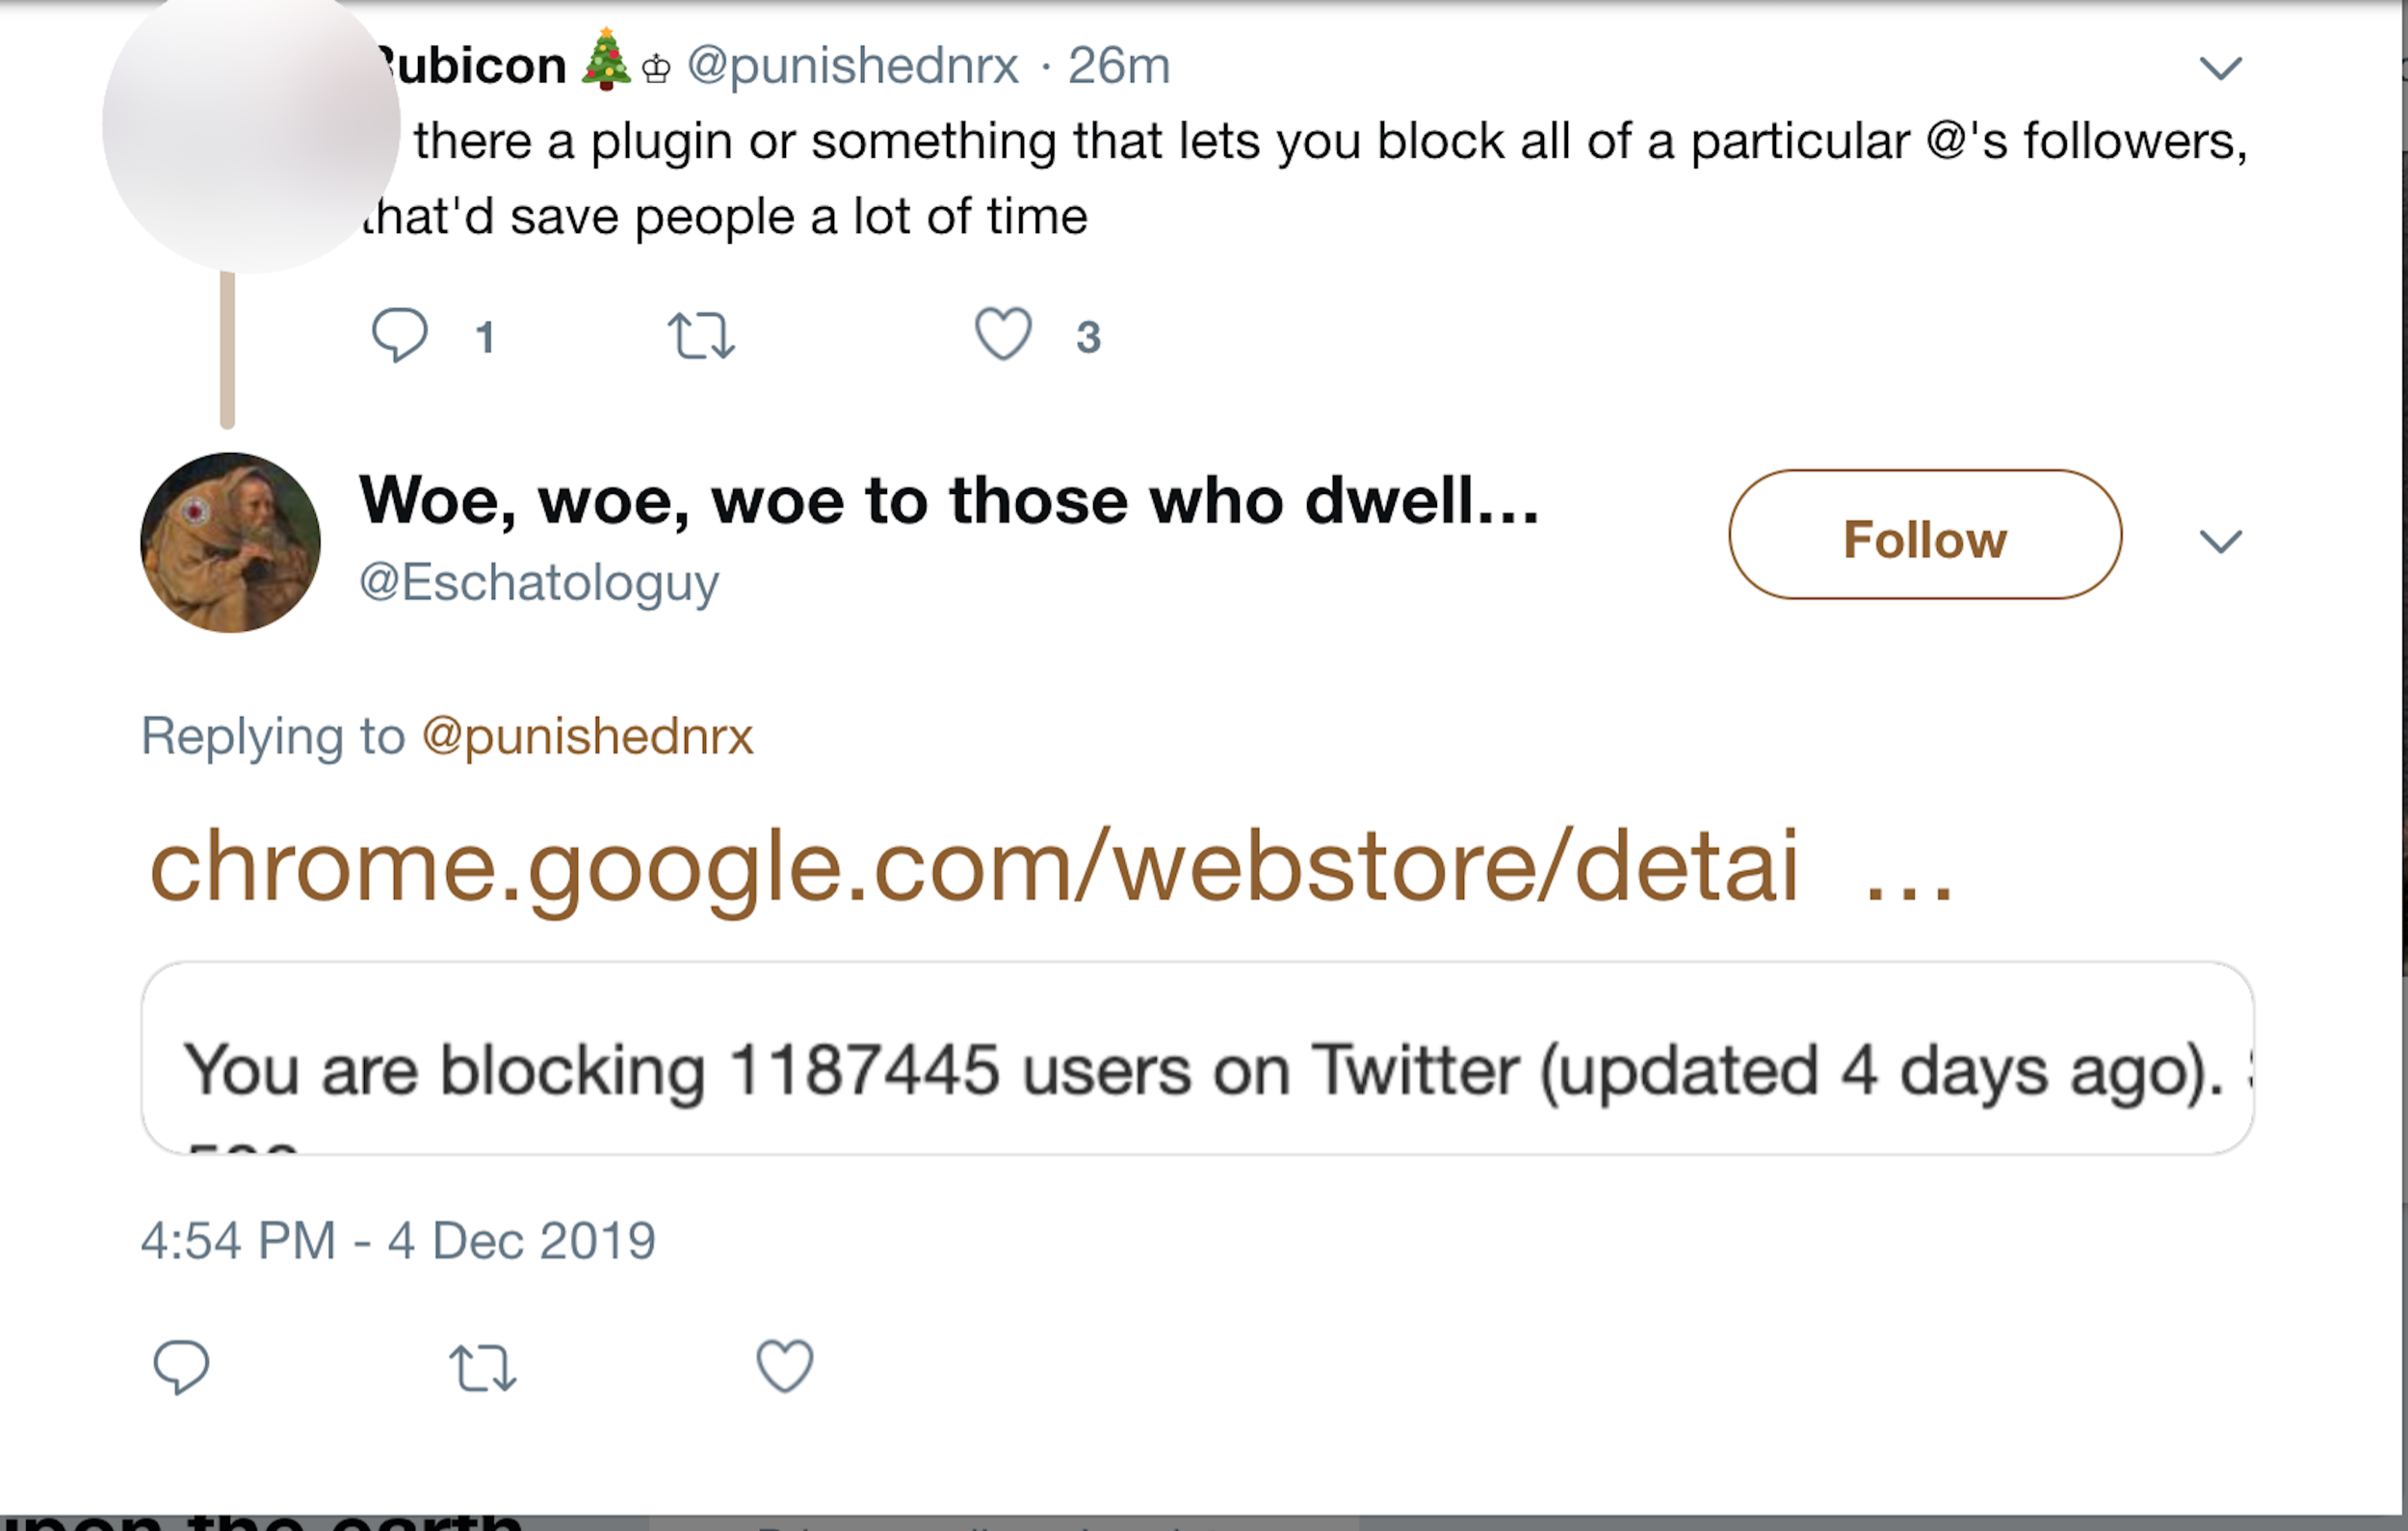 Woe including screenshot saying that he has "1187445 users on Twitter blocked (updated 4 days ago)" and a link to the Chrome extension for the block.